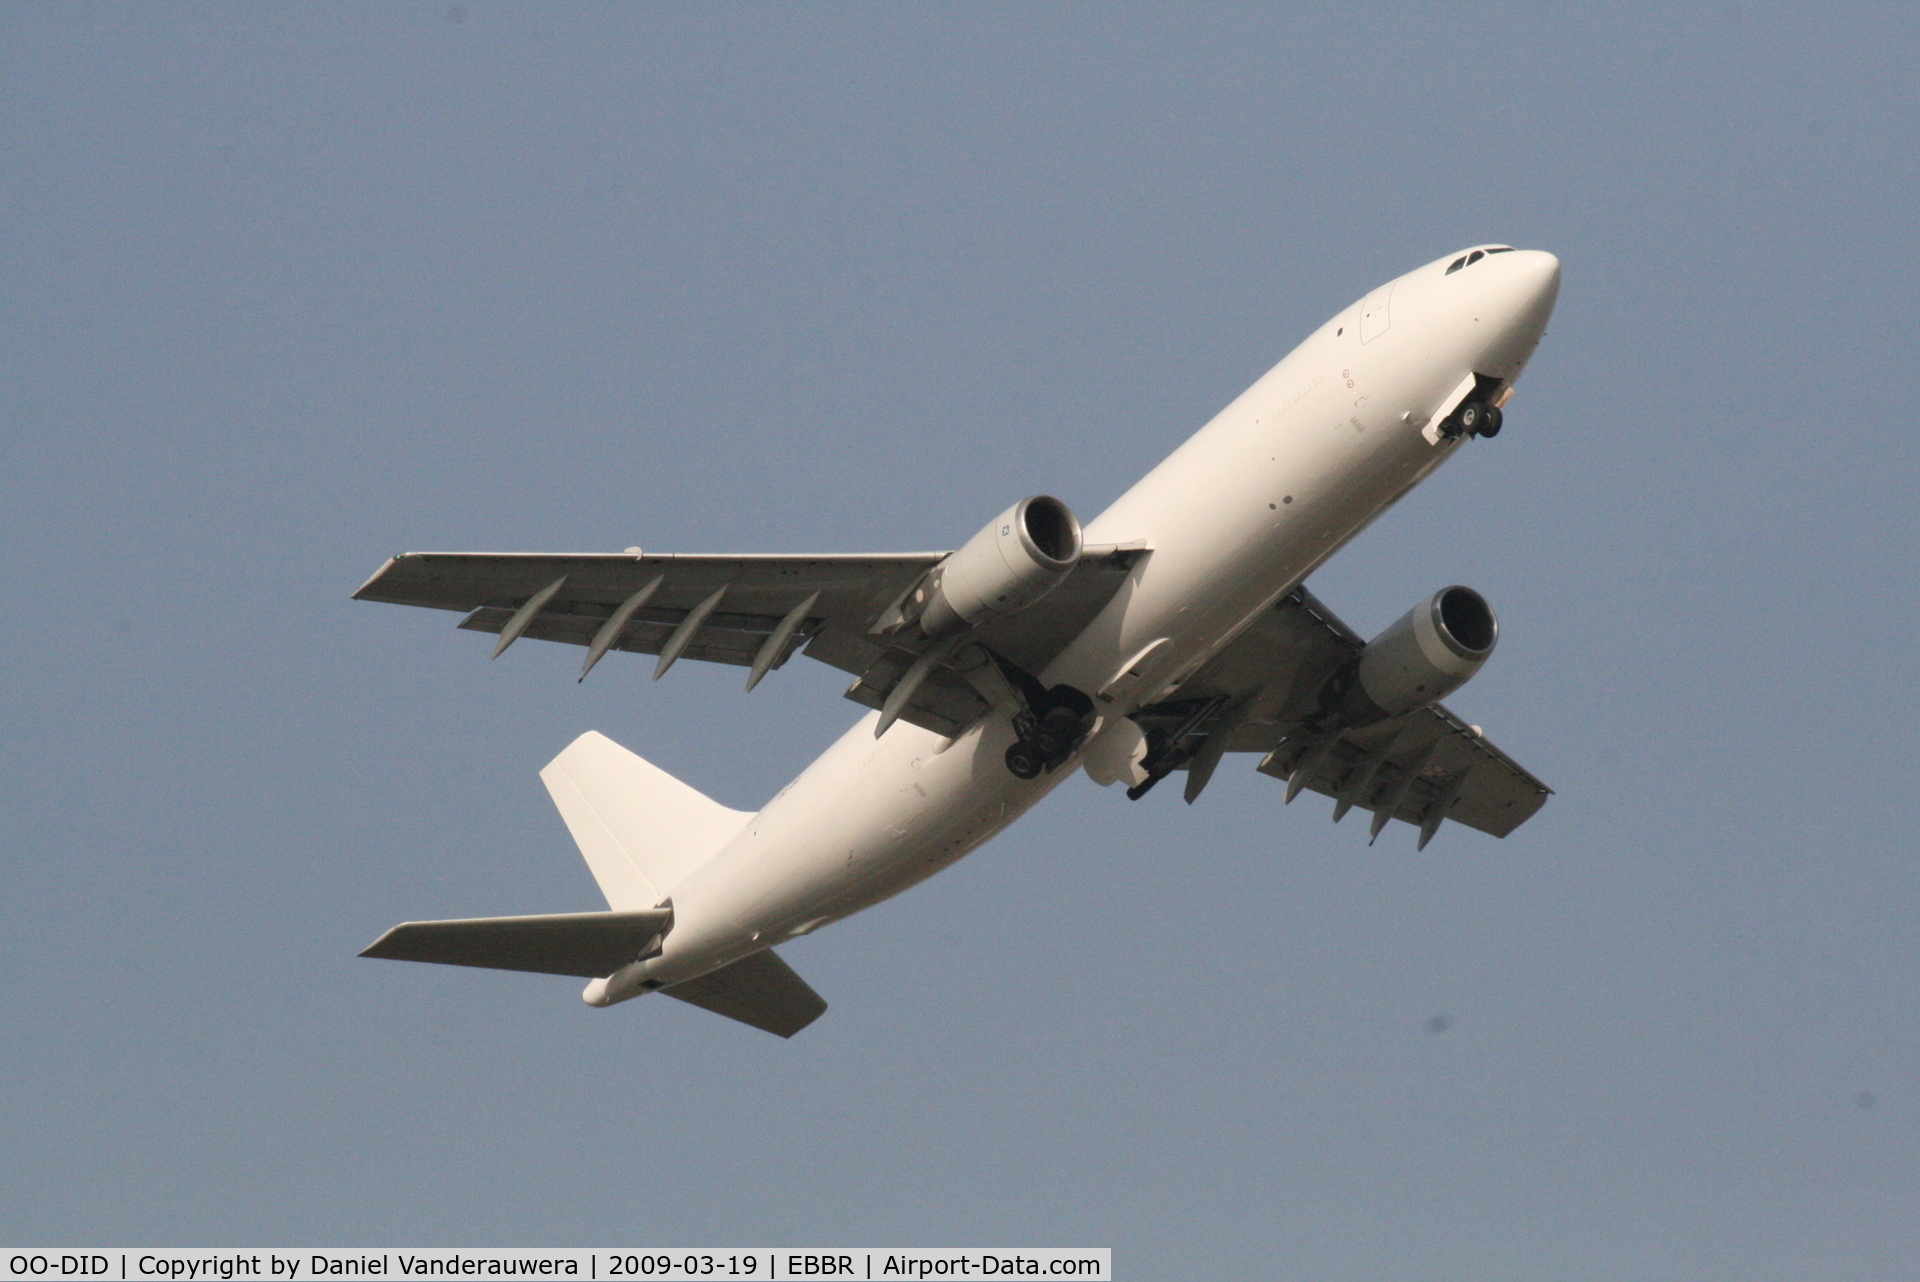 OO-DID, 1983 Airbus A300B4-203(F) C/N 235, Taking off from RWY 07R